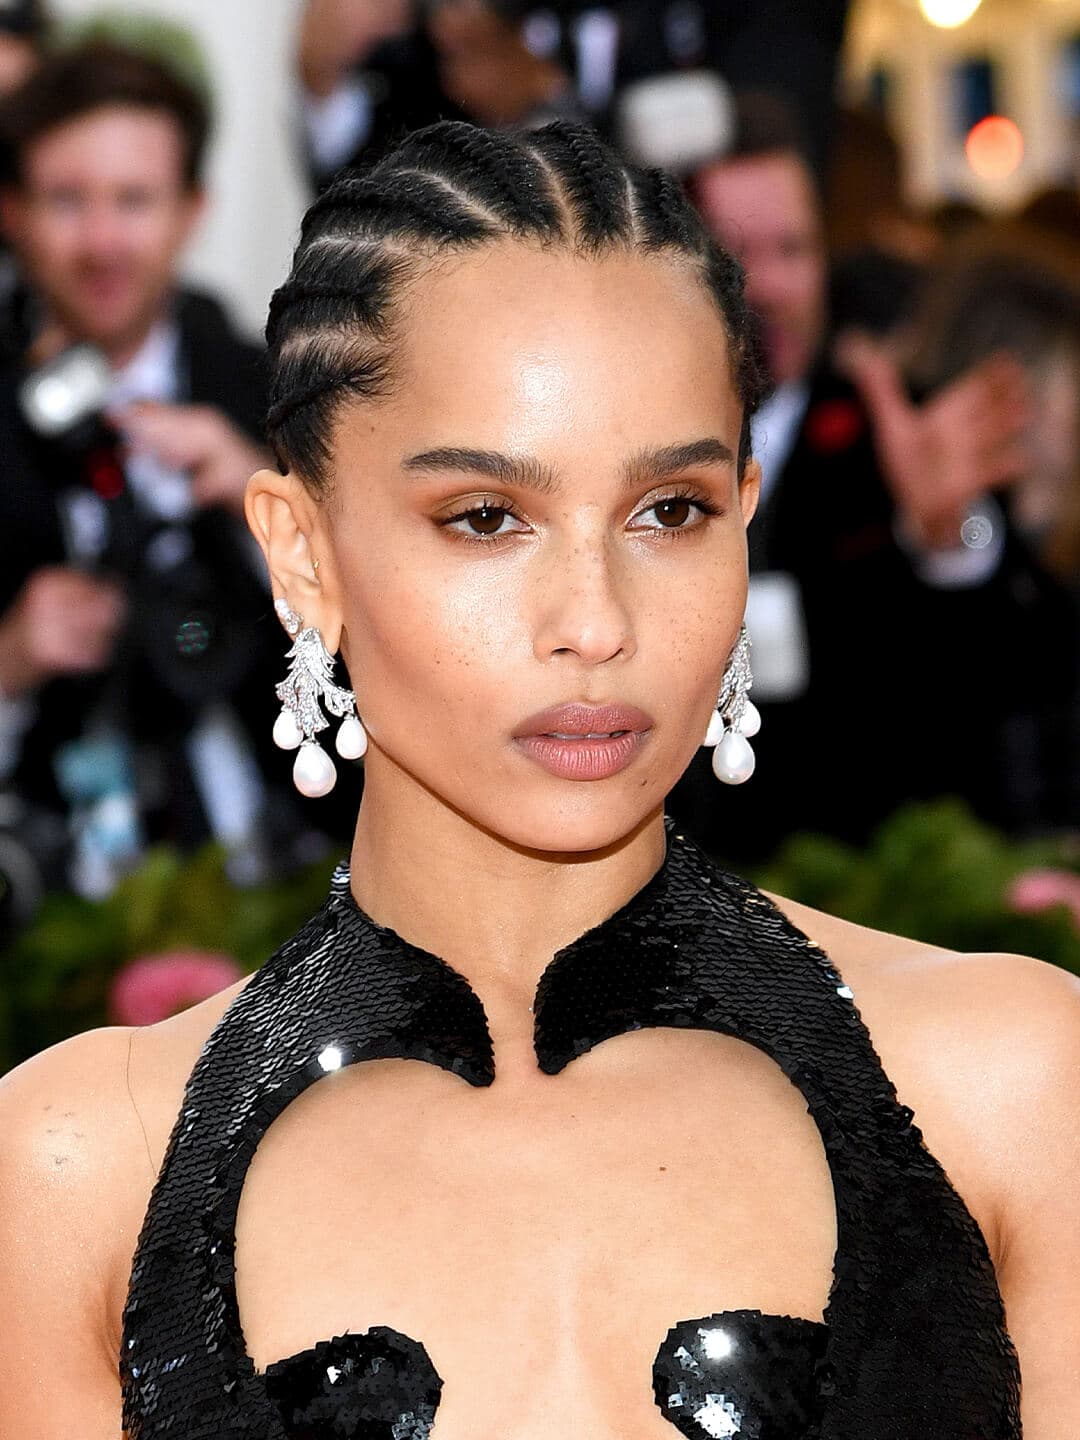 Zoe Kravitz looking glam in a black sequined dress matched with a braided hairstyle and silver and pearl earrings